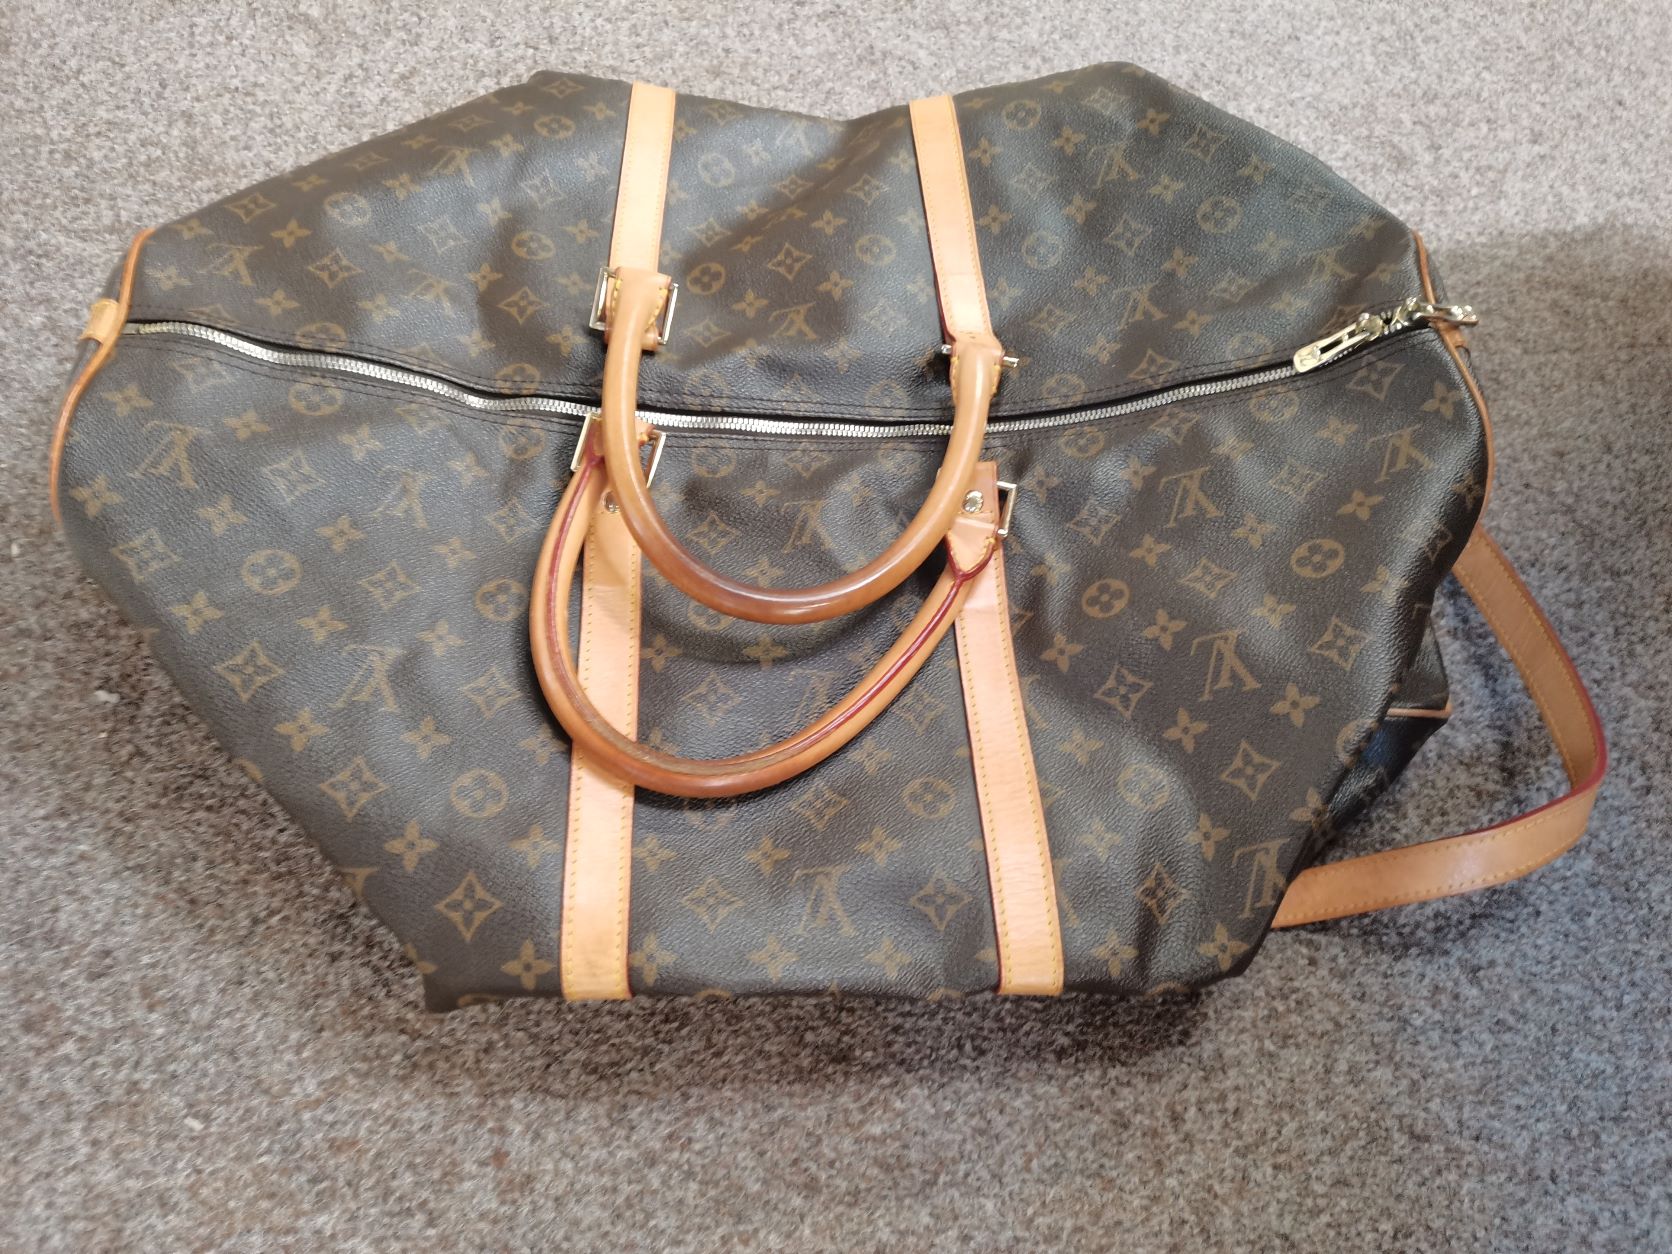 Genuine Louis Vuitton suit carrier and Keepall Duffel brown bag and a Visconti leather documents - Image 3 of 17